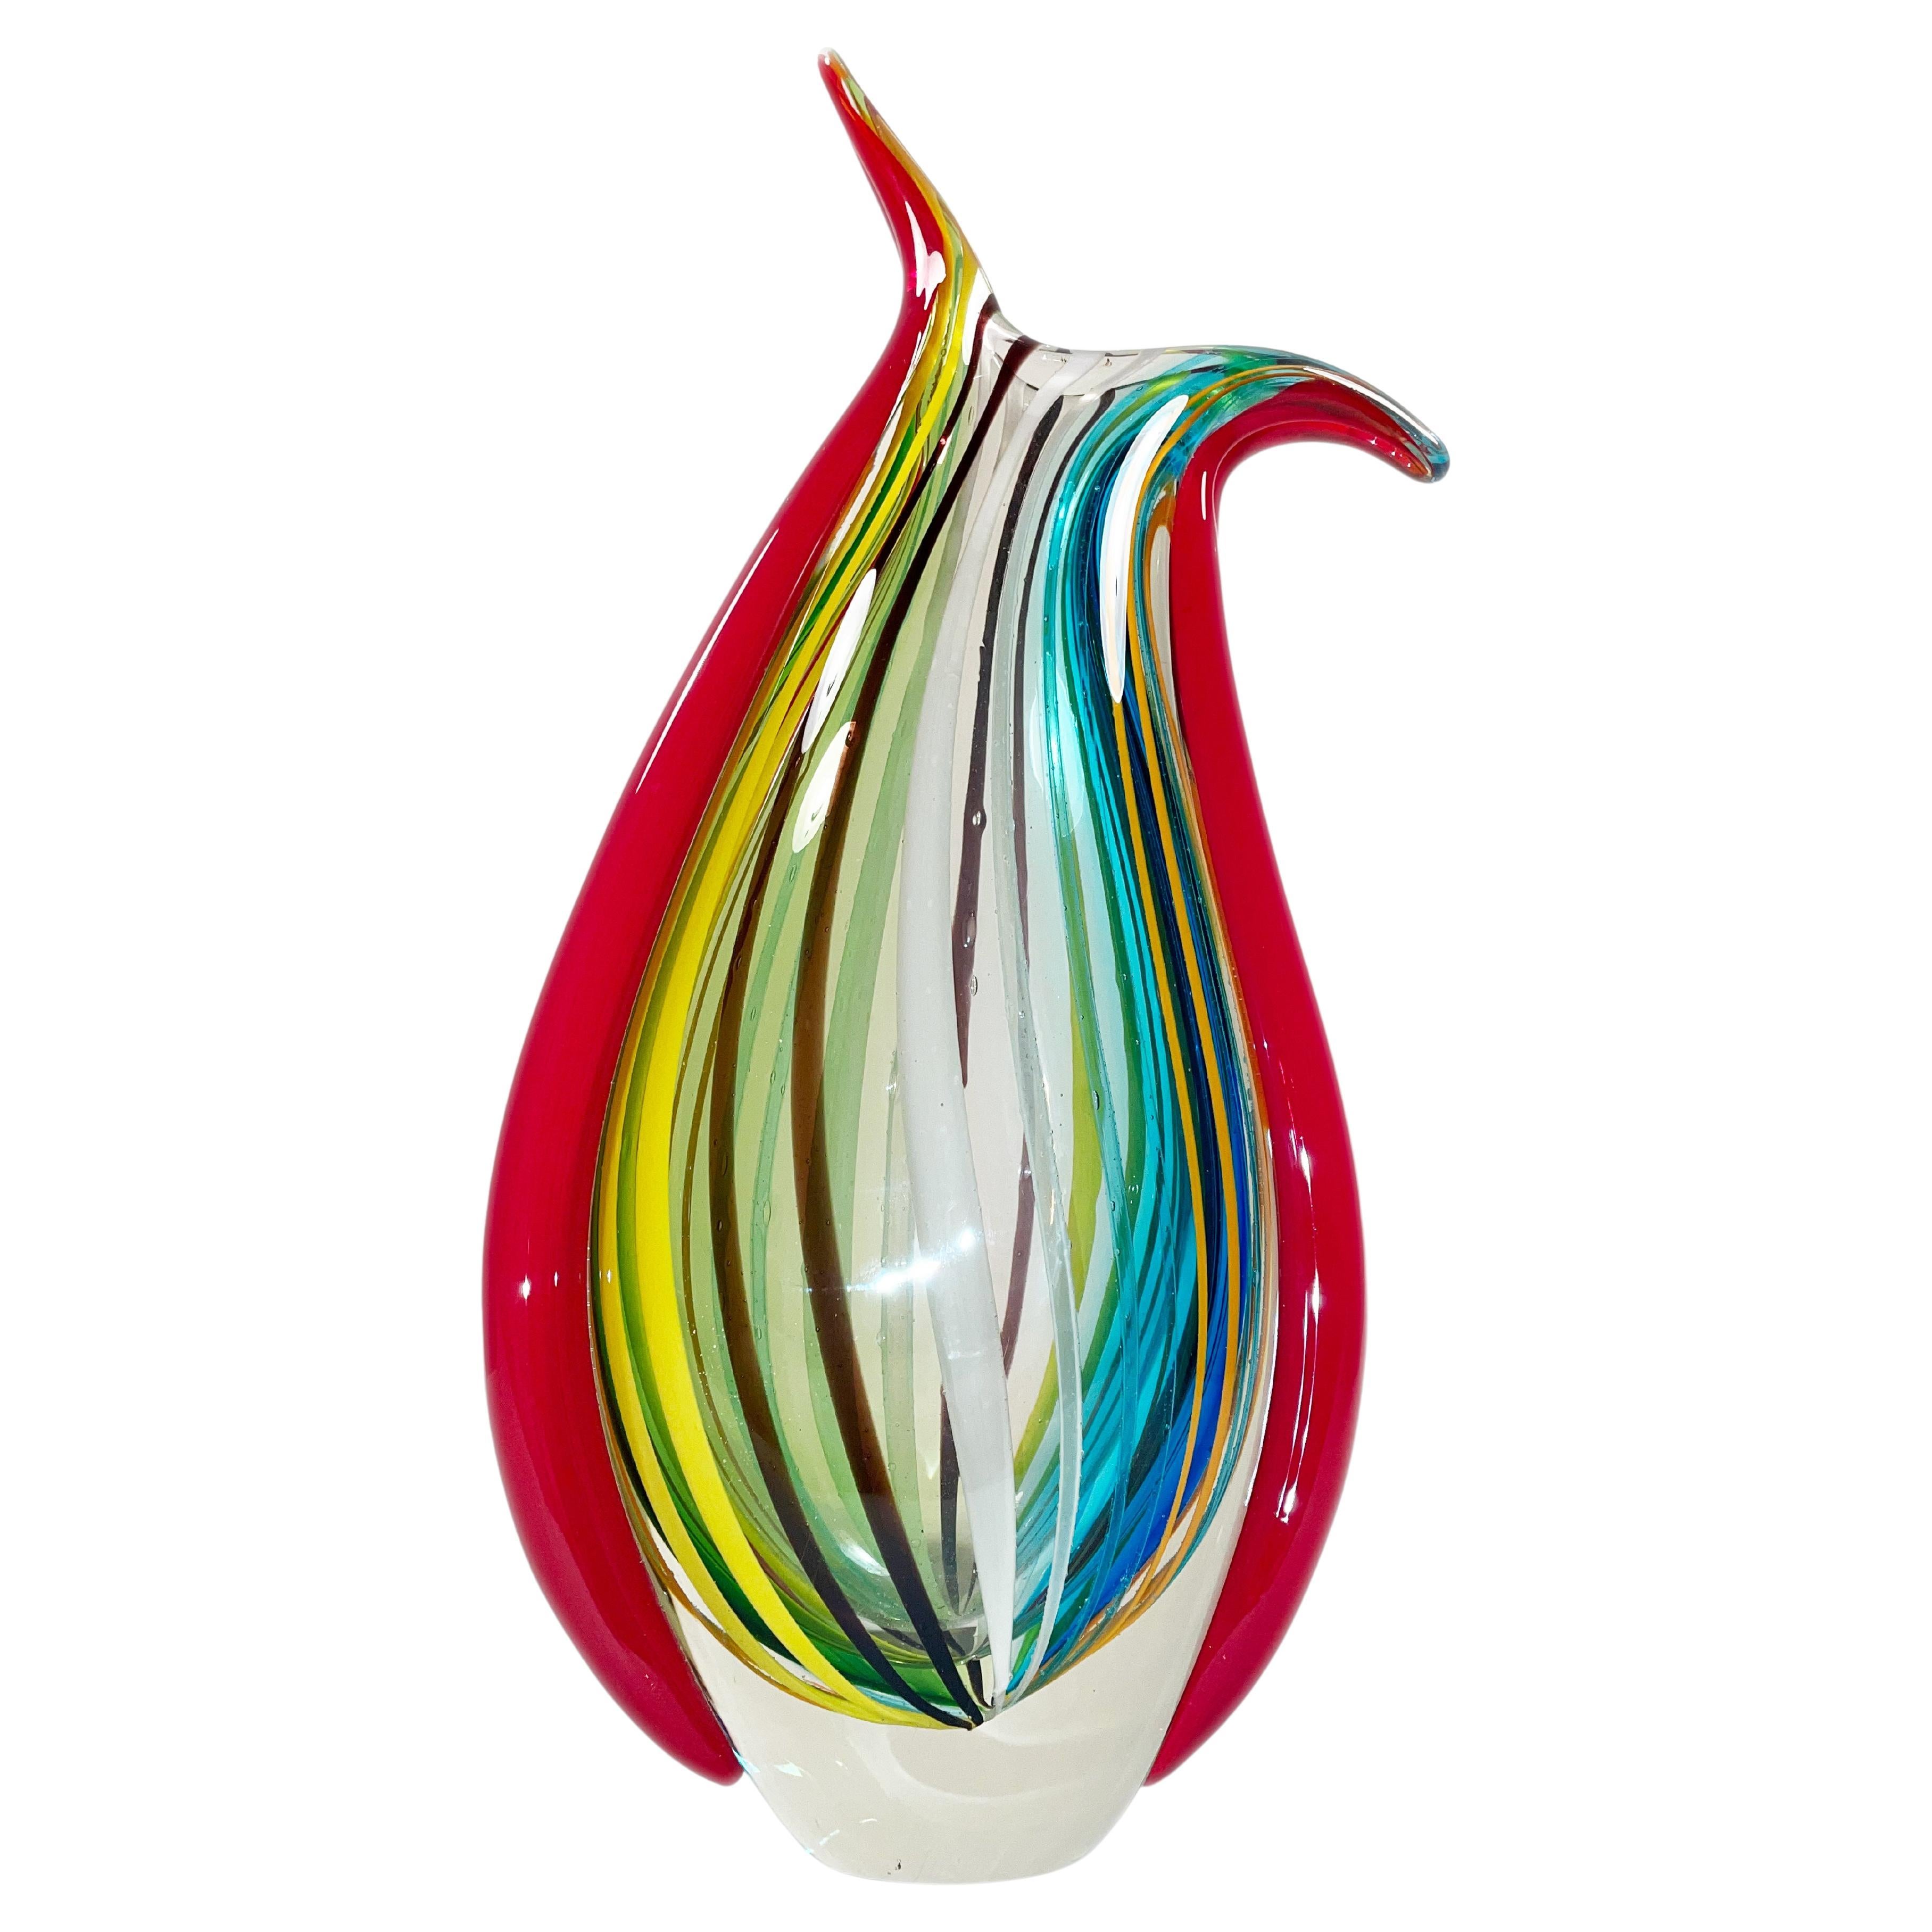 Italian Mid-Century Modern Applied and Decorated Murano Large Art Glass Vase  For Sale